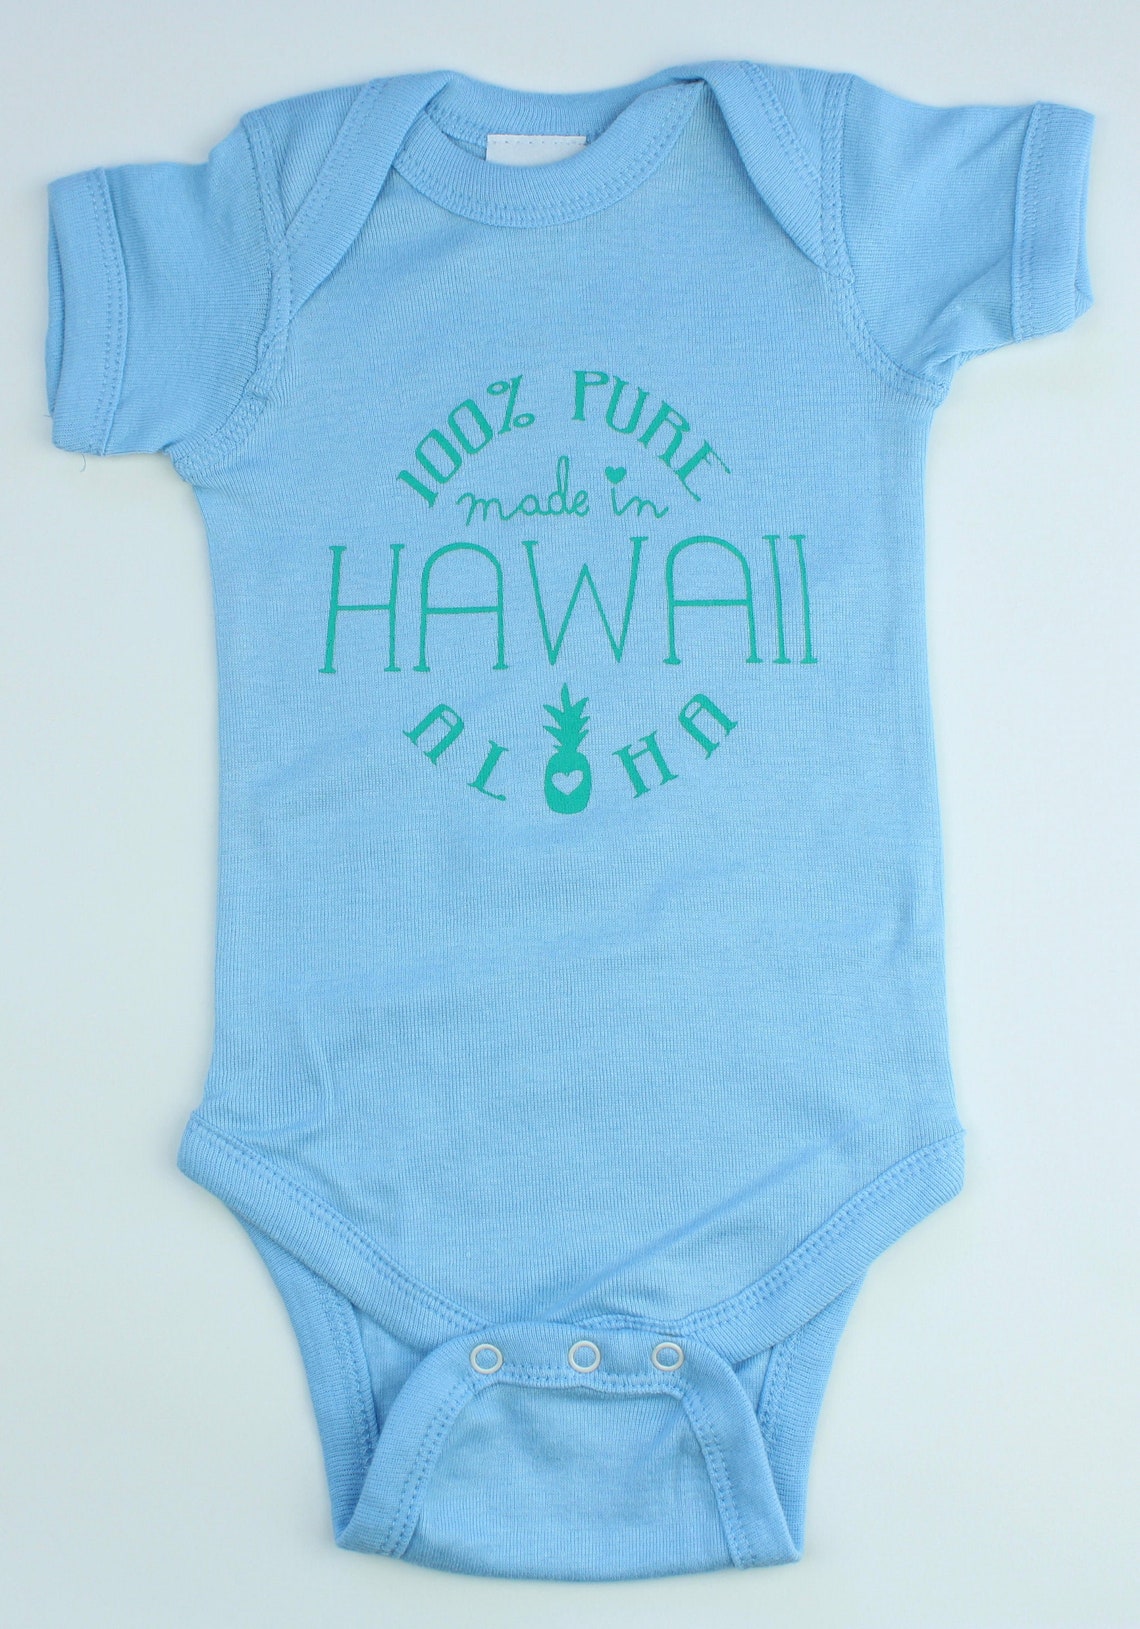 Made in Hawaii Outfit Gender Reveal Hawaiian Baby Gifts - Etsy